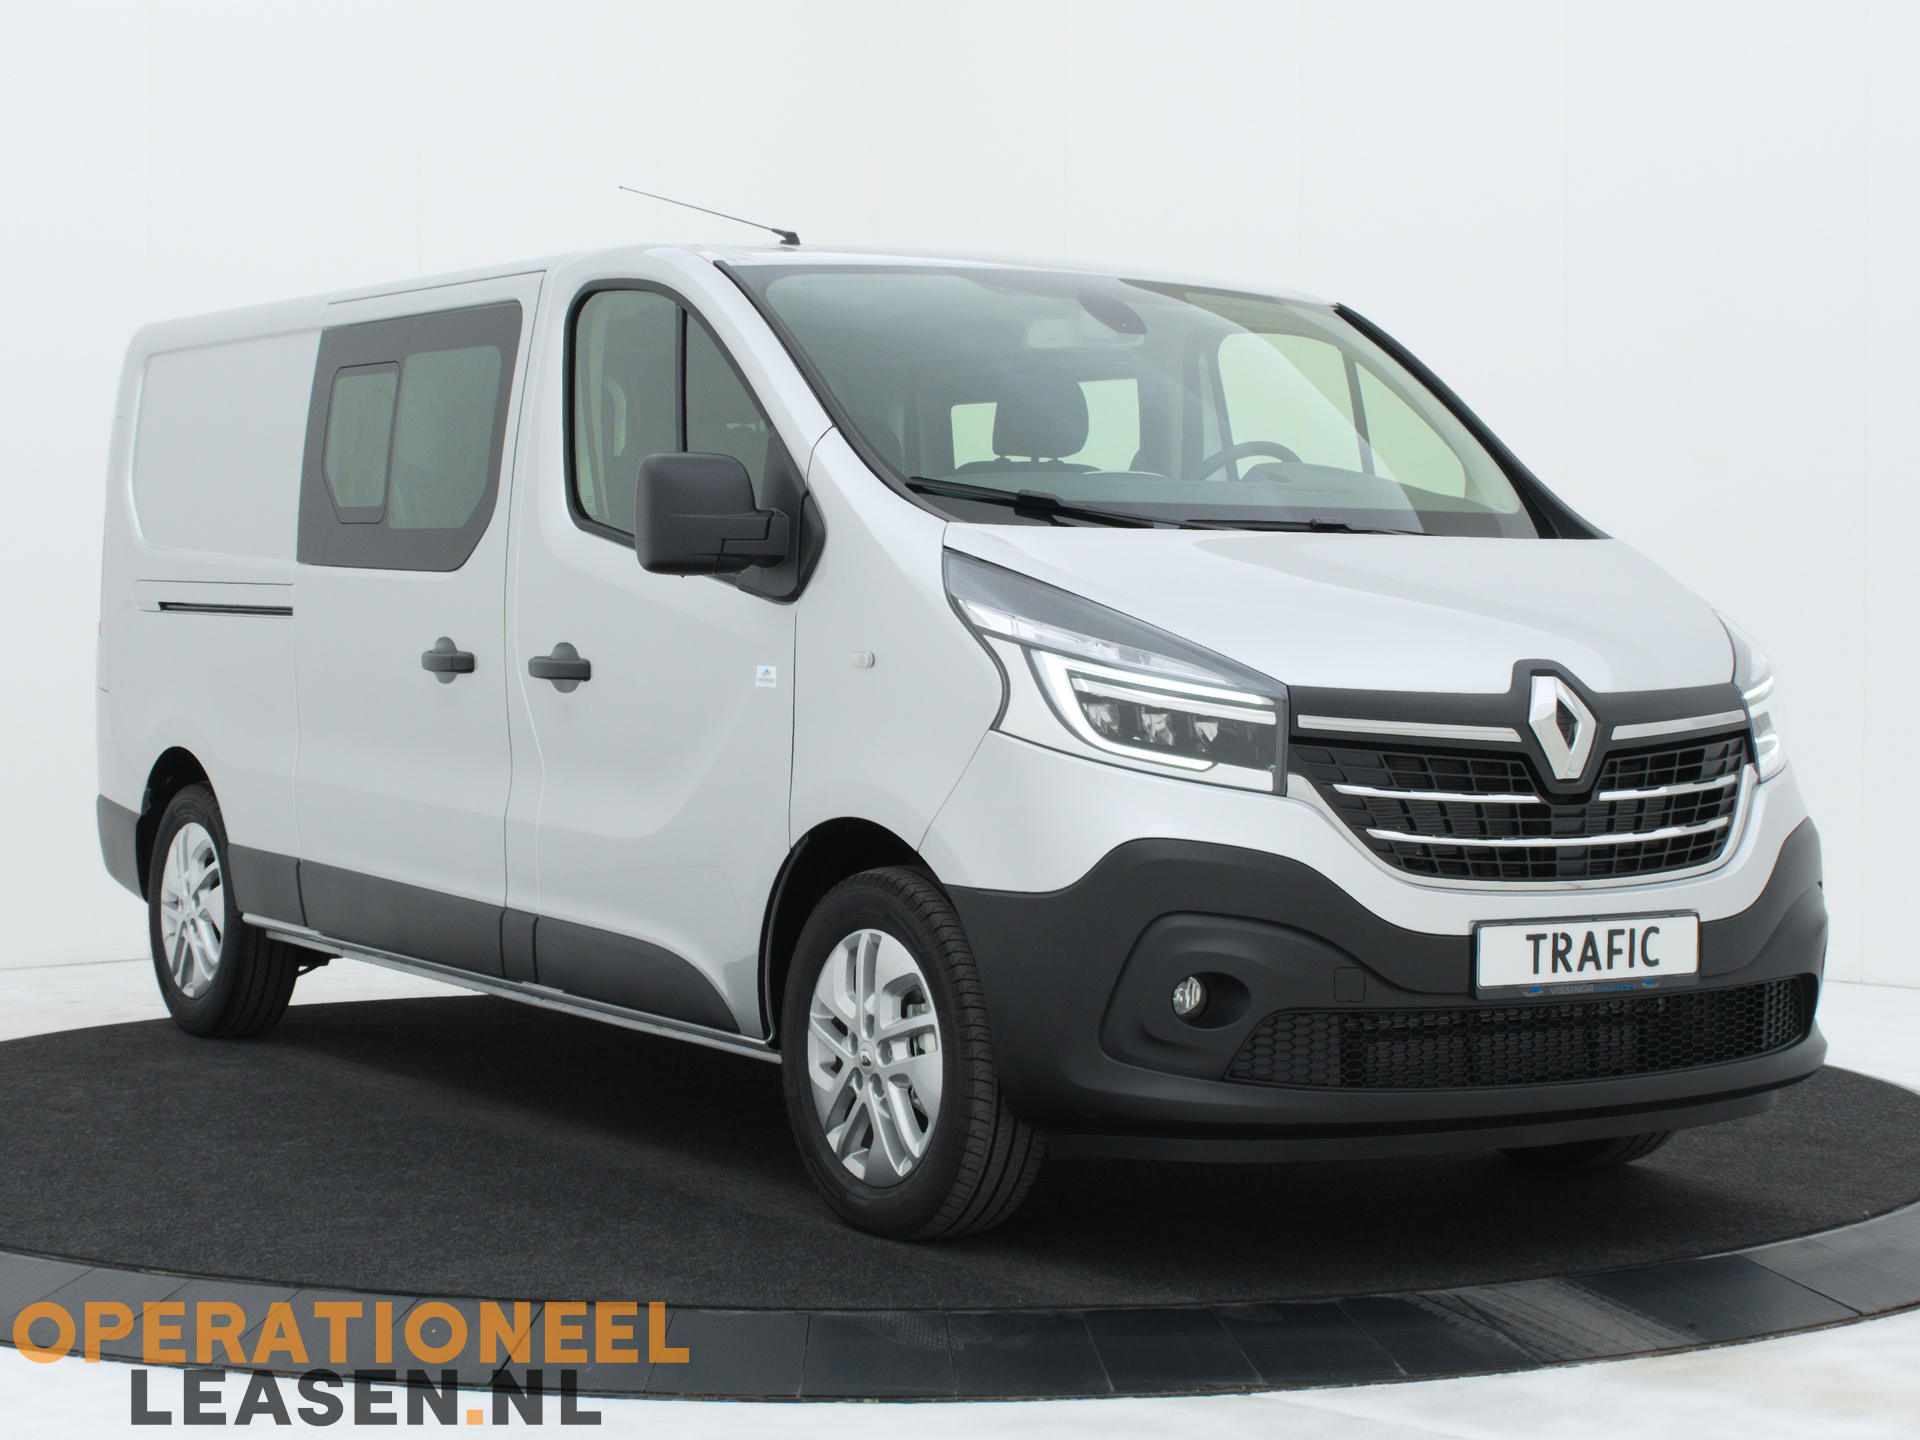 Operational lease Renault master traffic-7